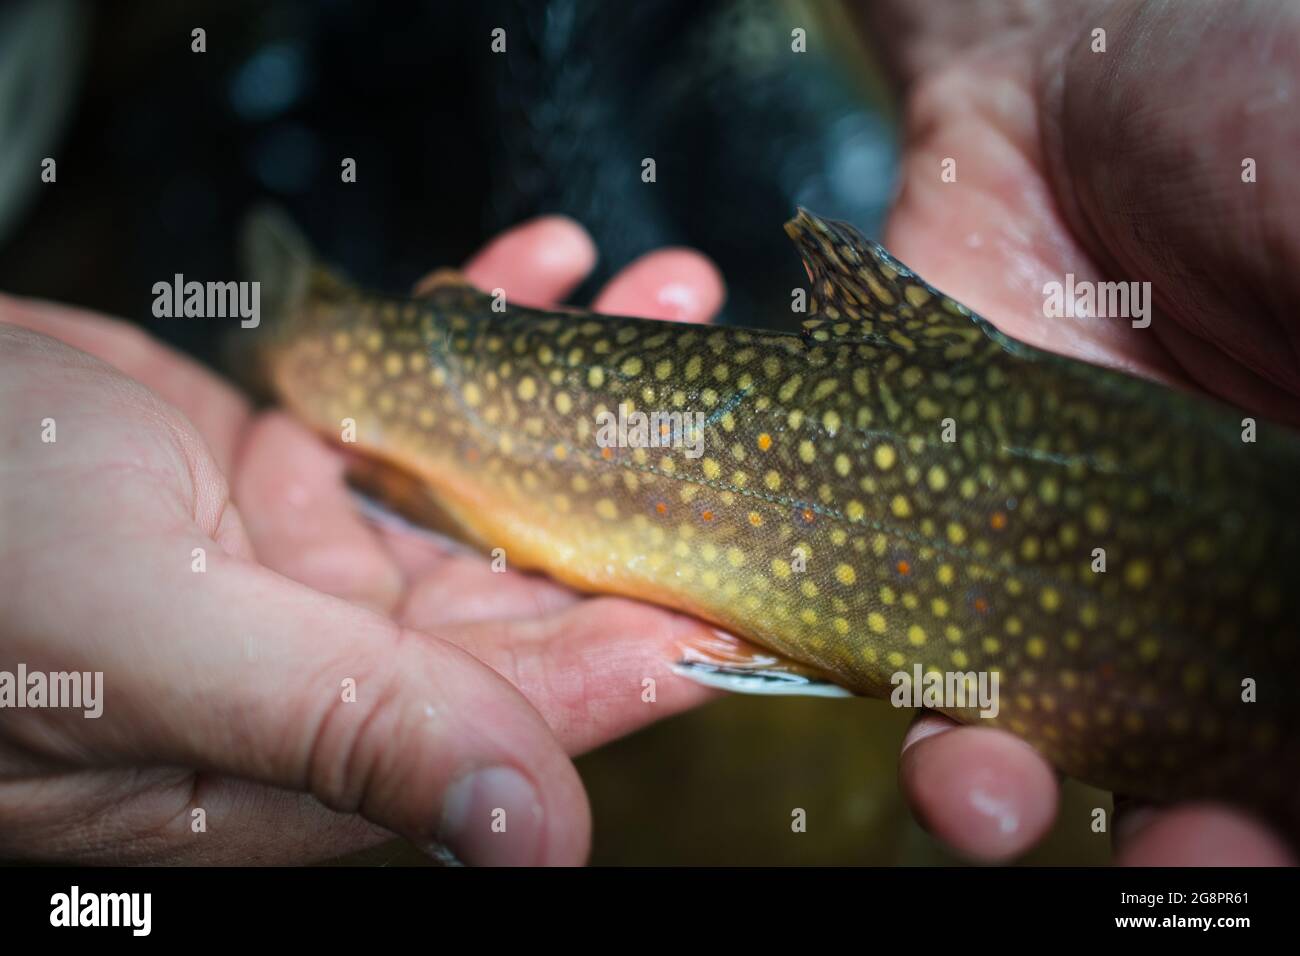 Holding a Brook Trout: Caught fly fishing, soon to be released! Stock Photo